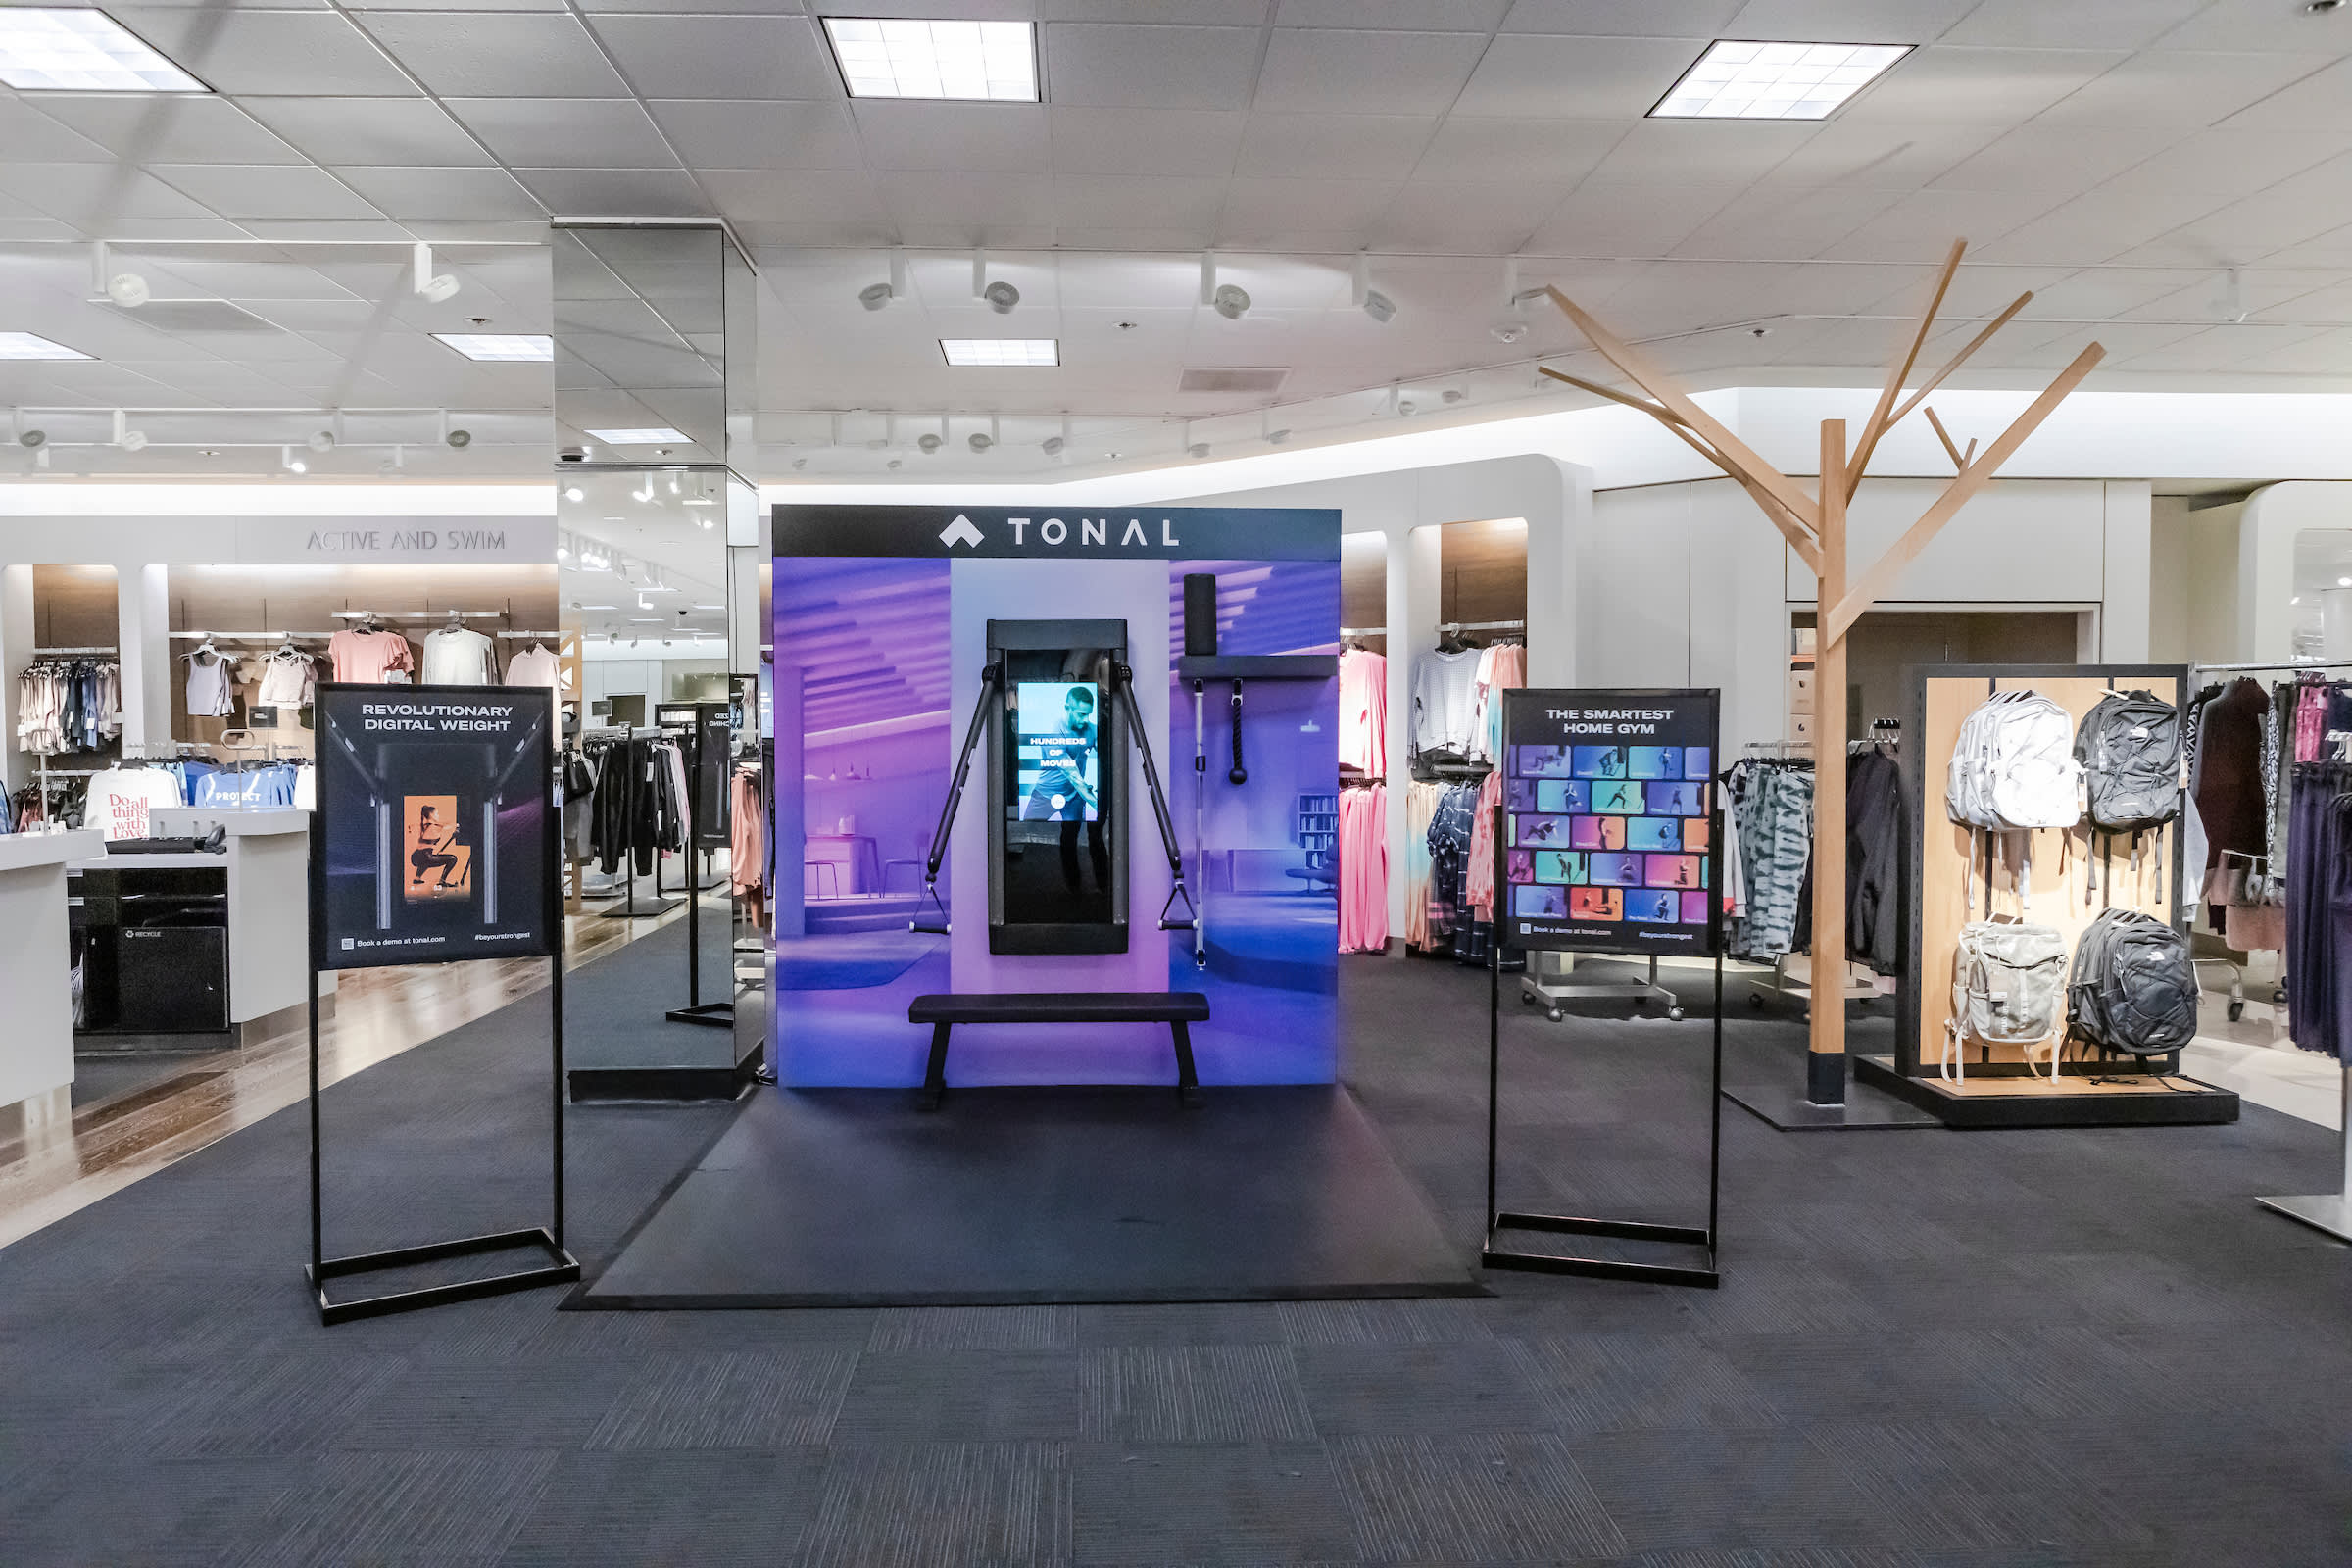 Nordstrom to add Tonal shops in 40 stores to boost fitness offerings